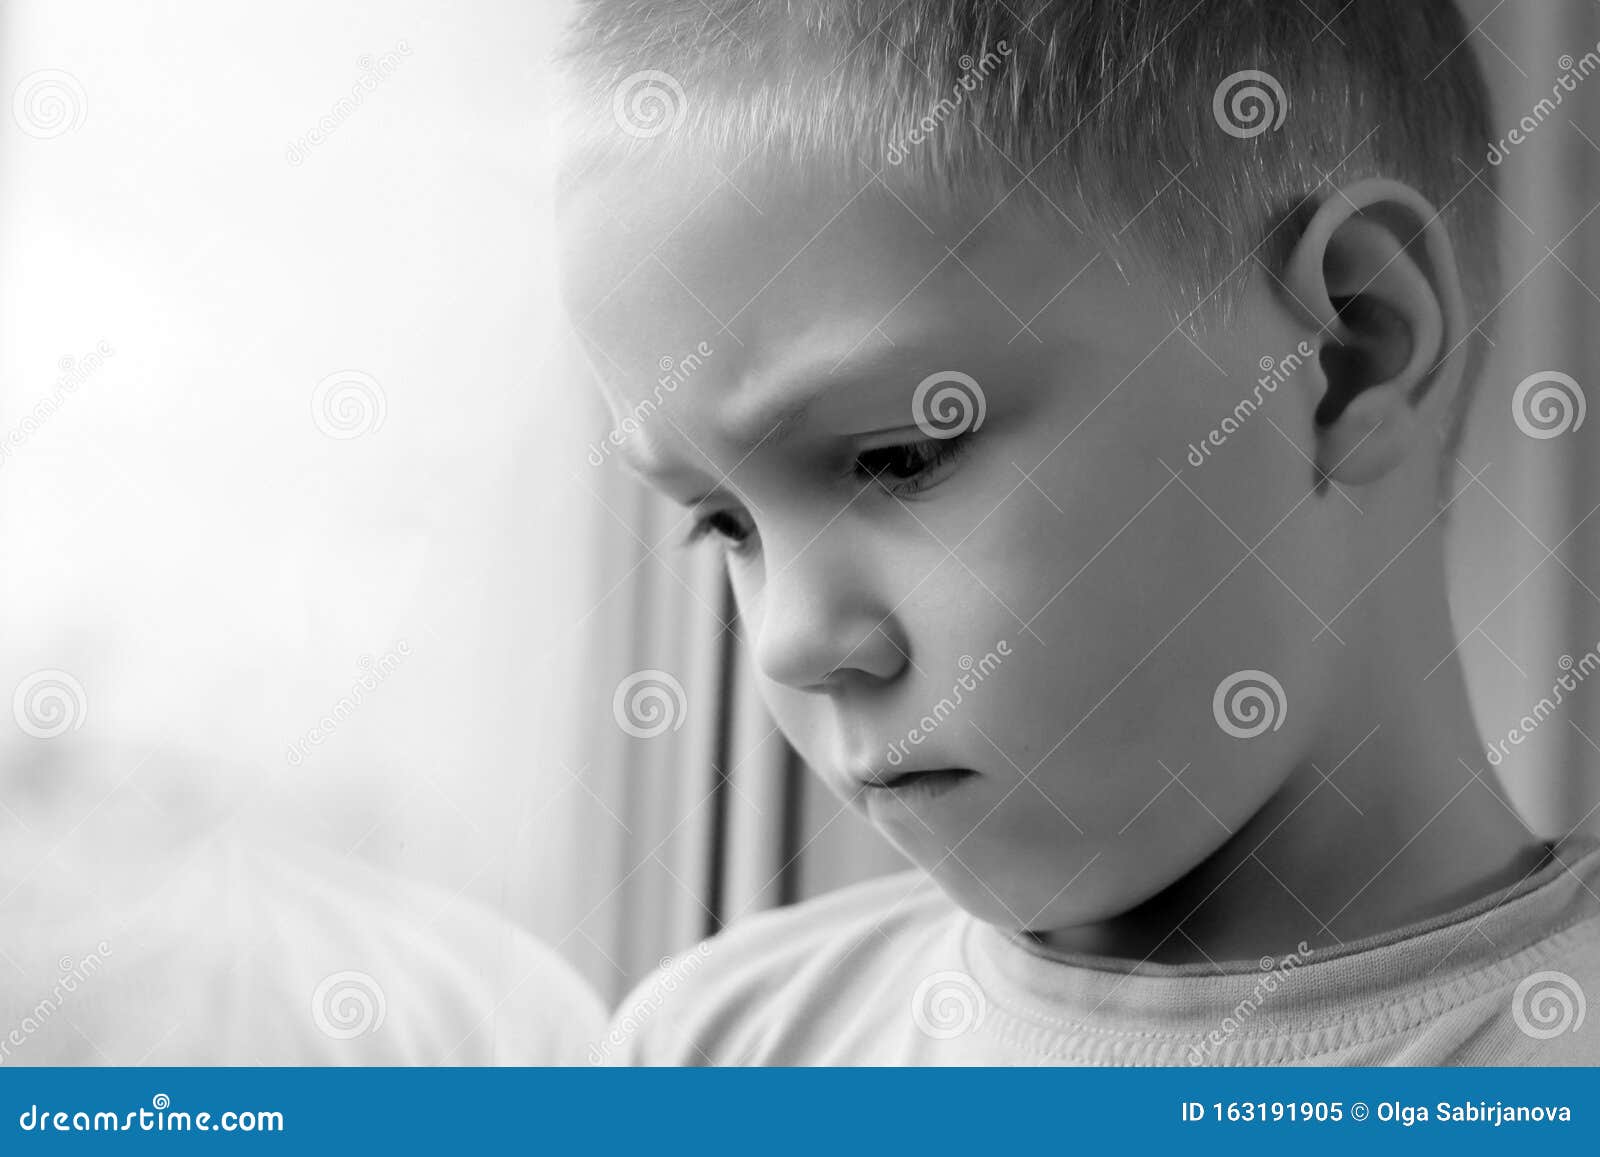 Sad Boy at the Window, Loneliness and Depression Stock Image - Image of ...